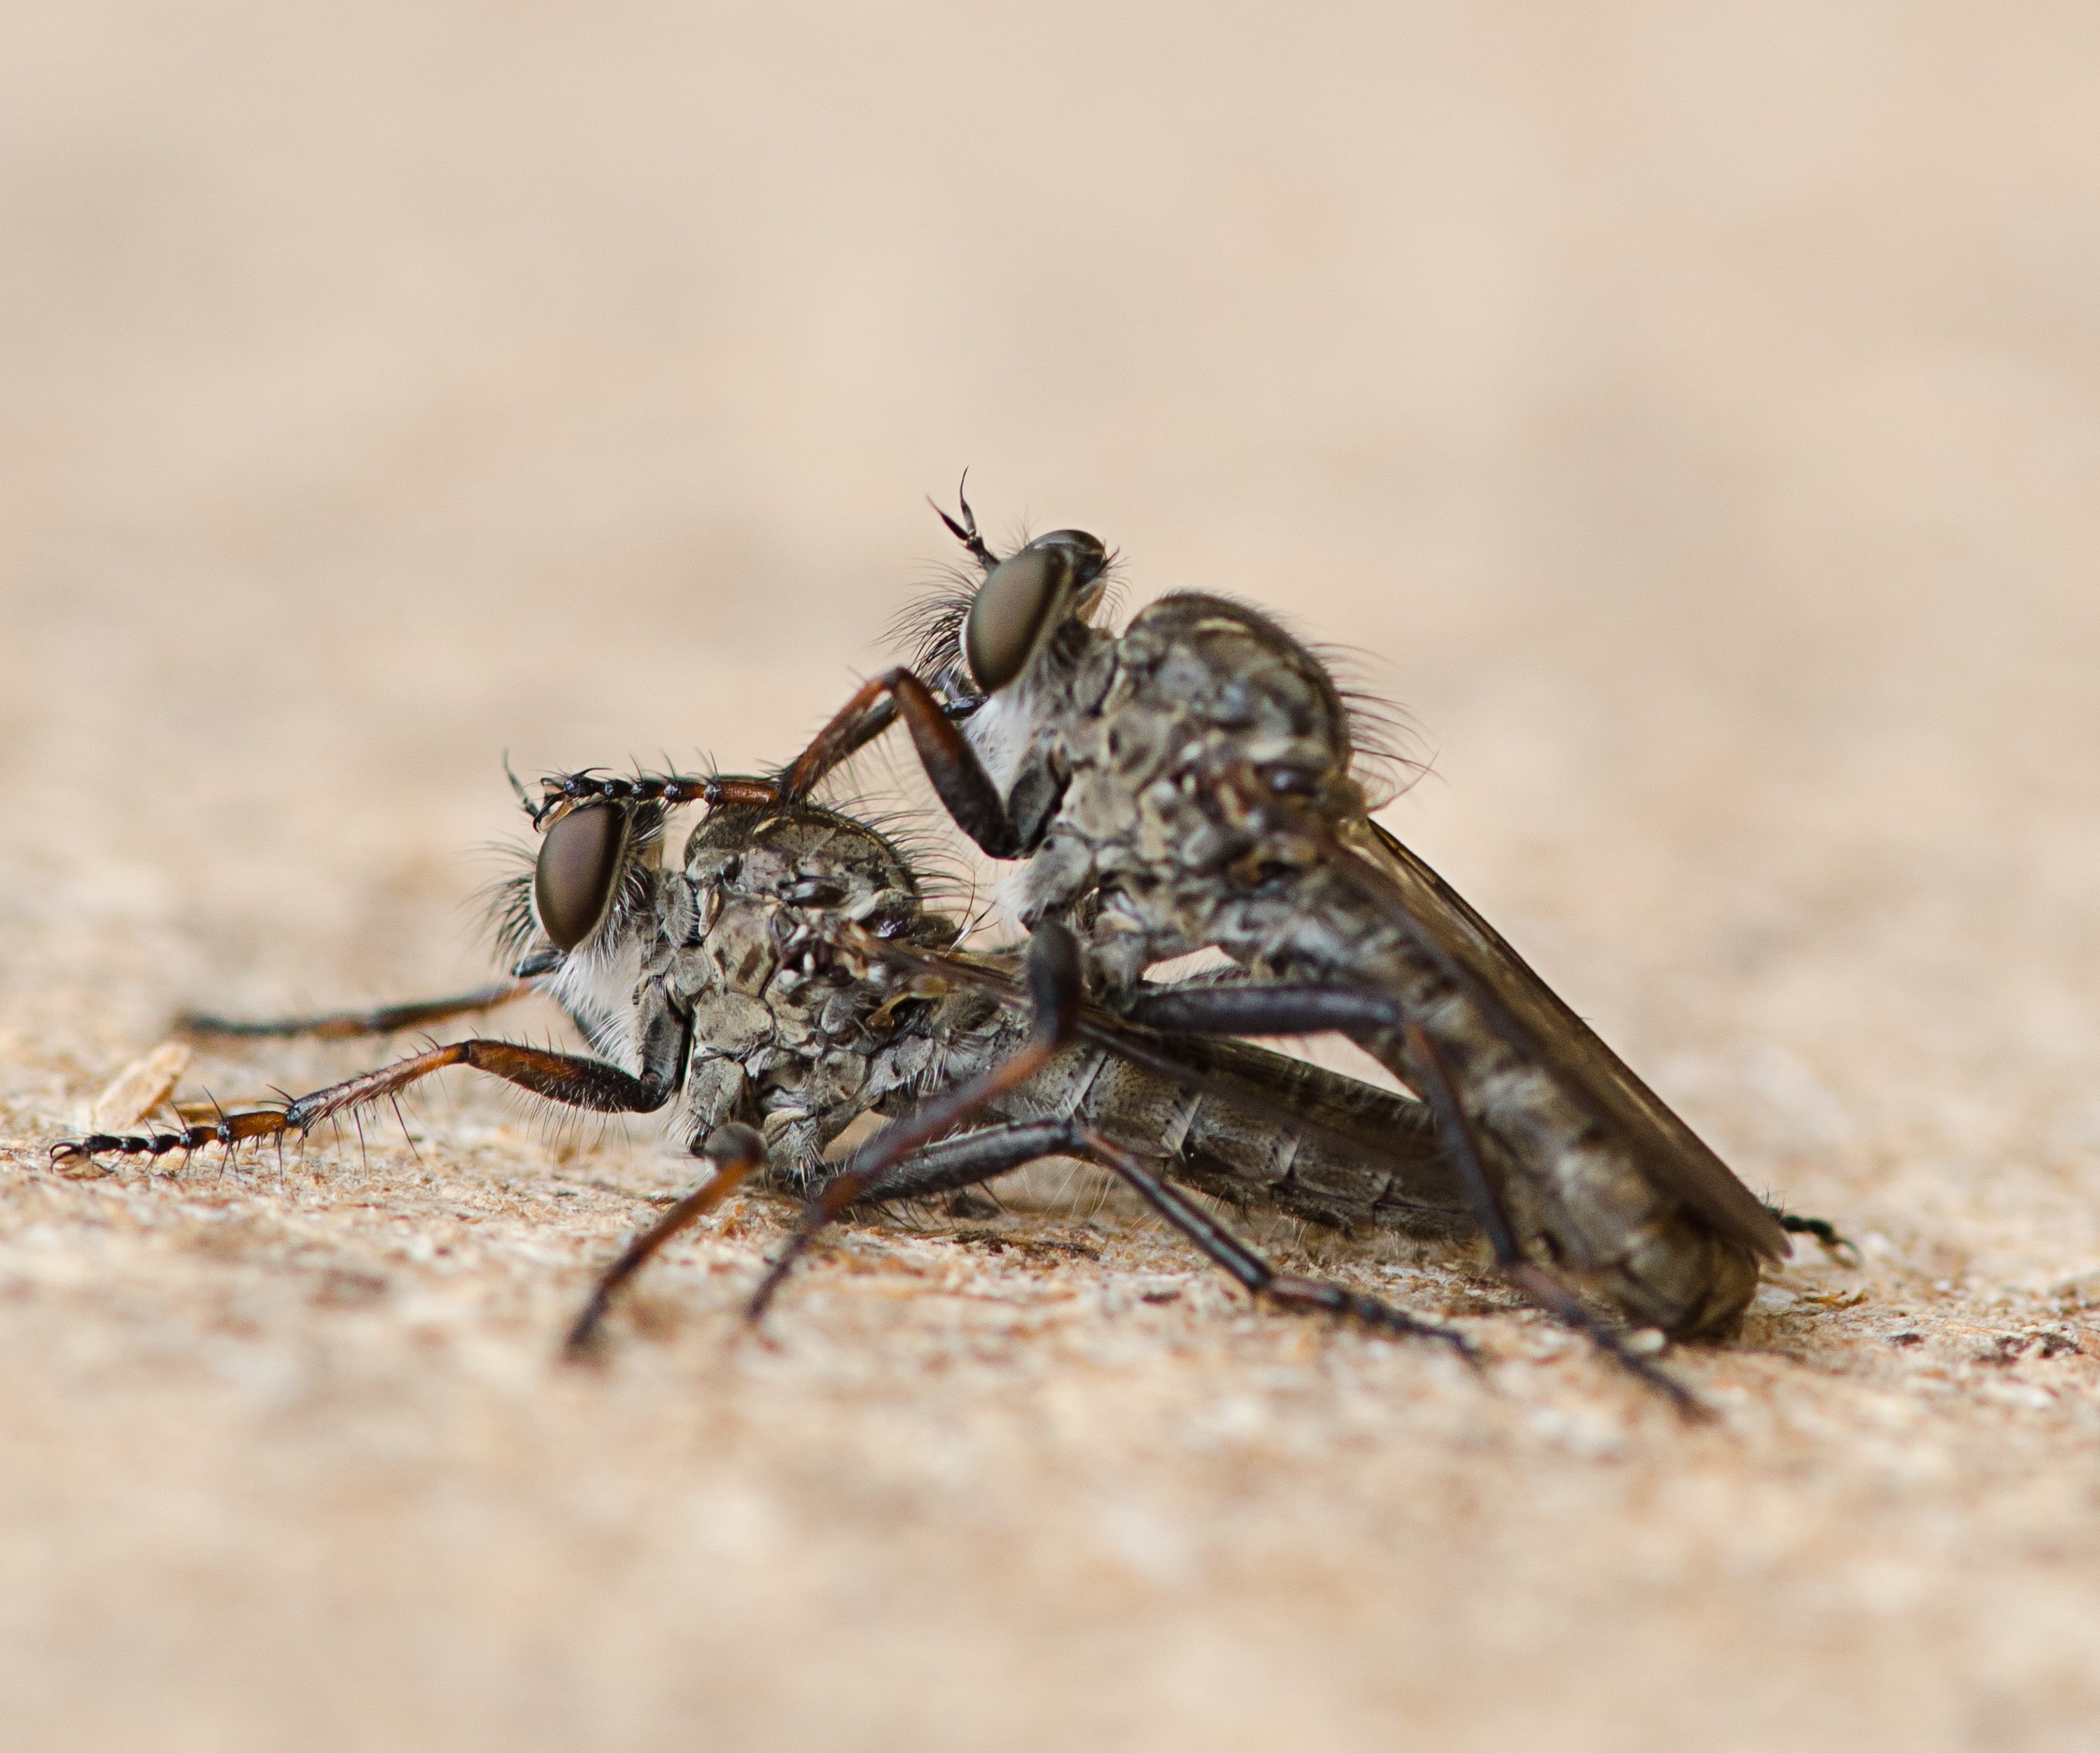 tilt shift photography of two black Robber flies mating